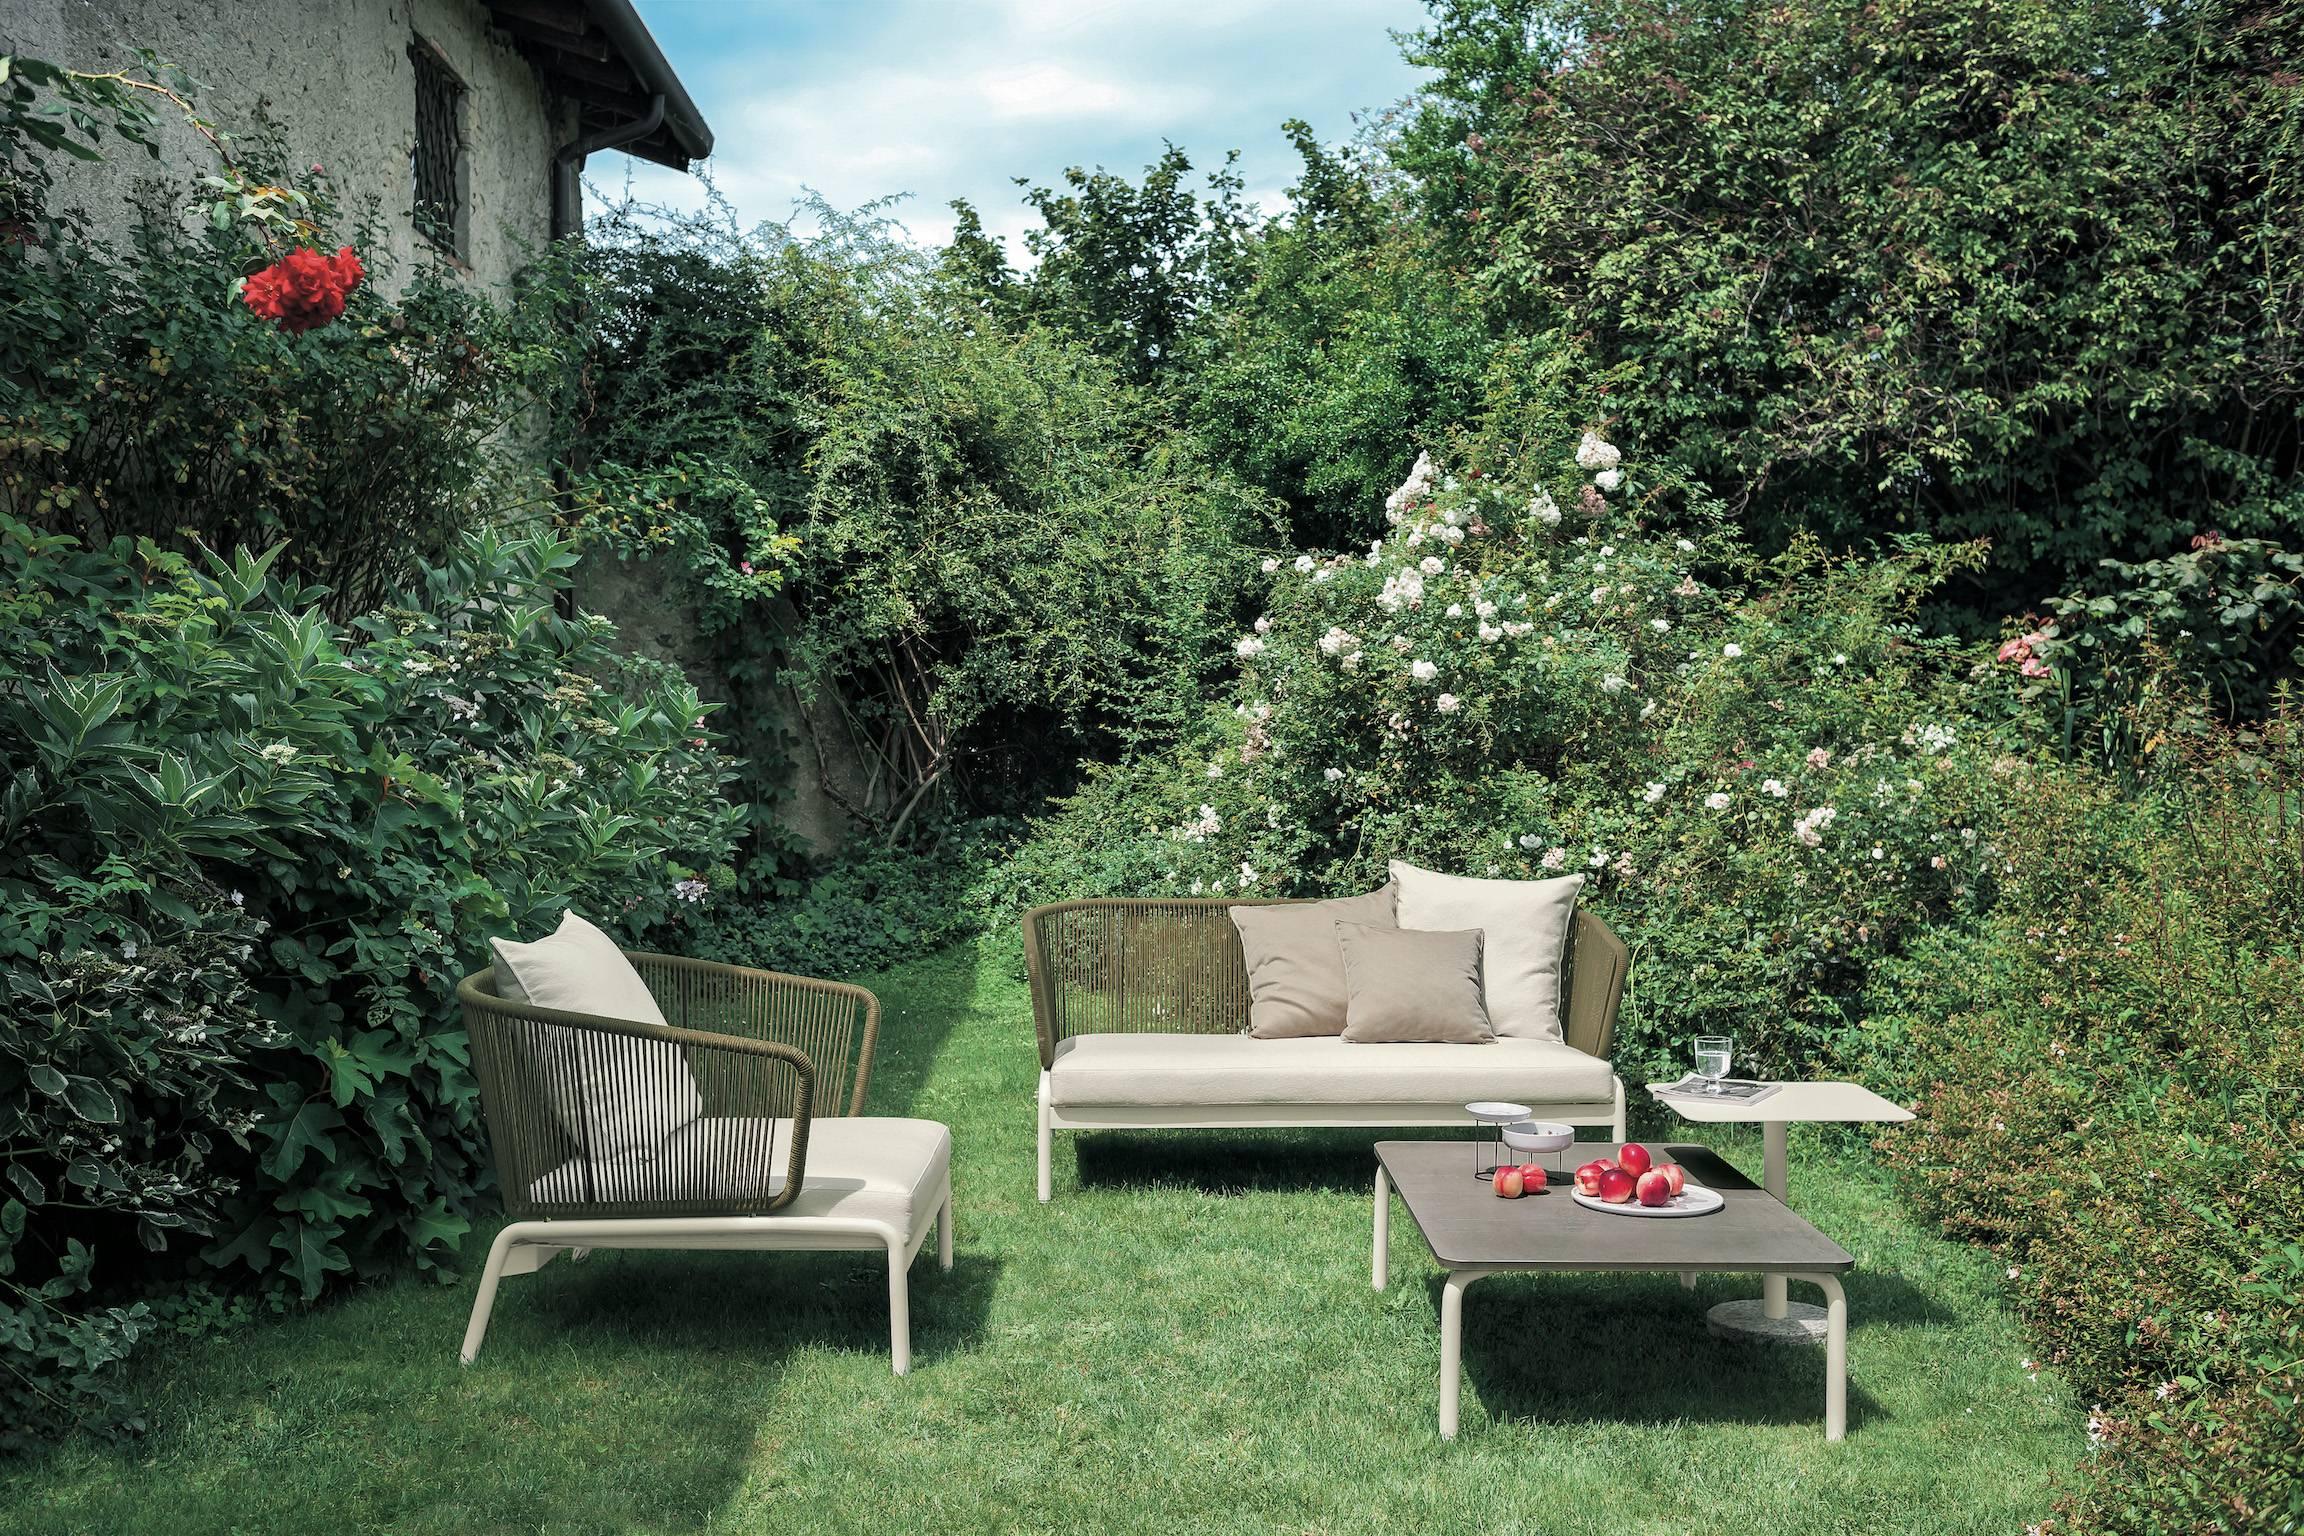 Roda Spool Two-Seat Sofa for Outdoor/Indoor Use by Rodolfo Dordoni (Moderne) im Angebot